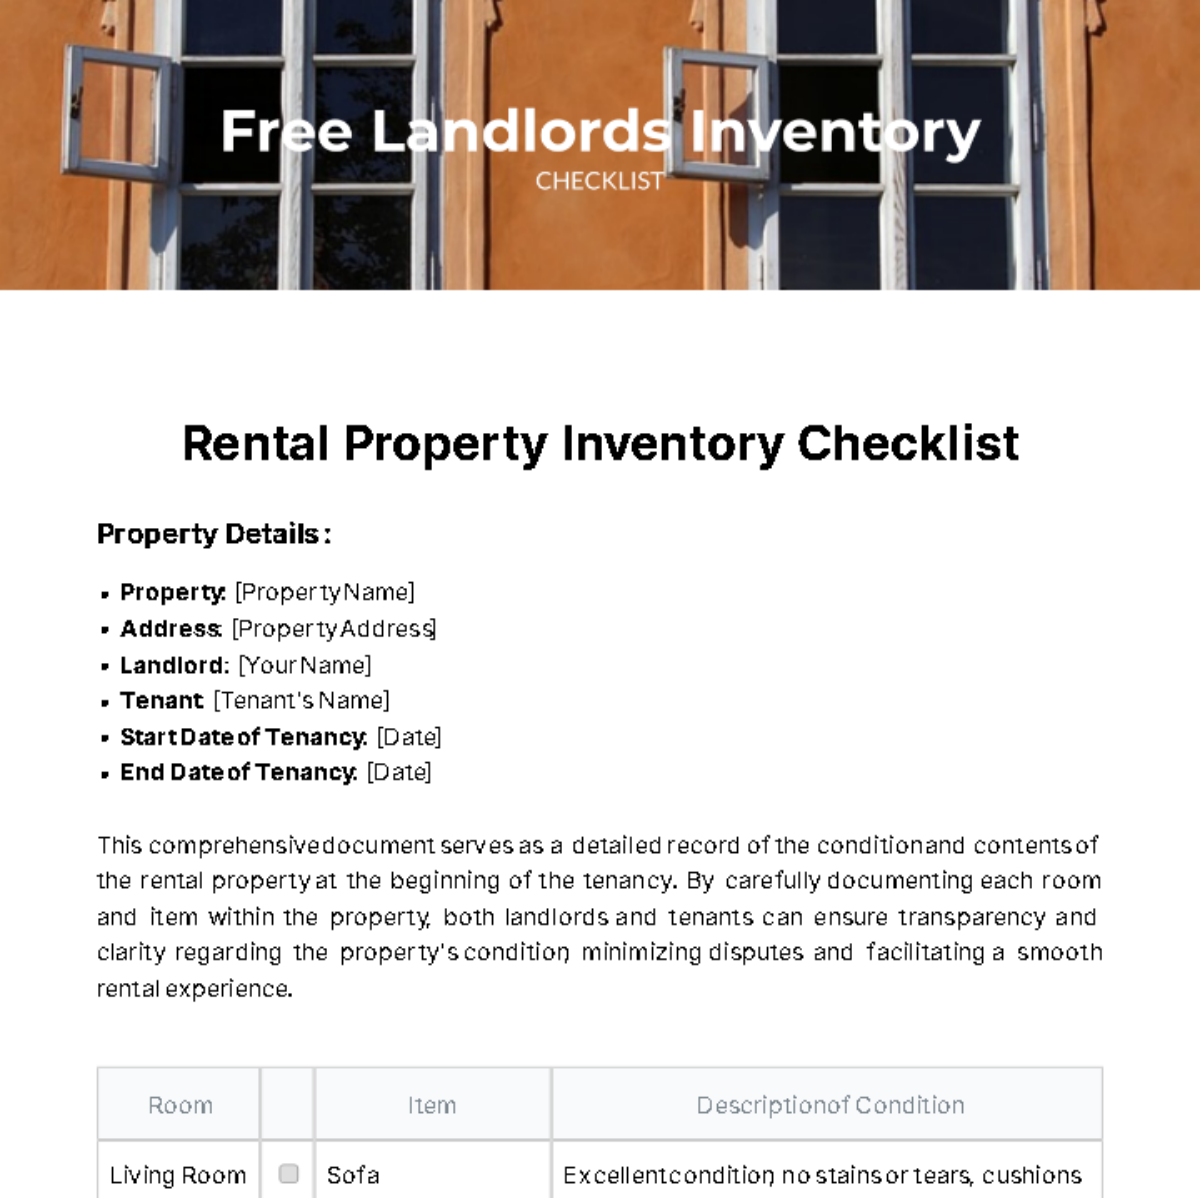 Landlords Inventory Checklist Template